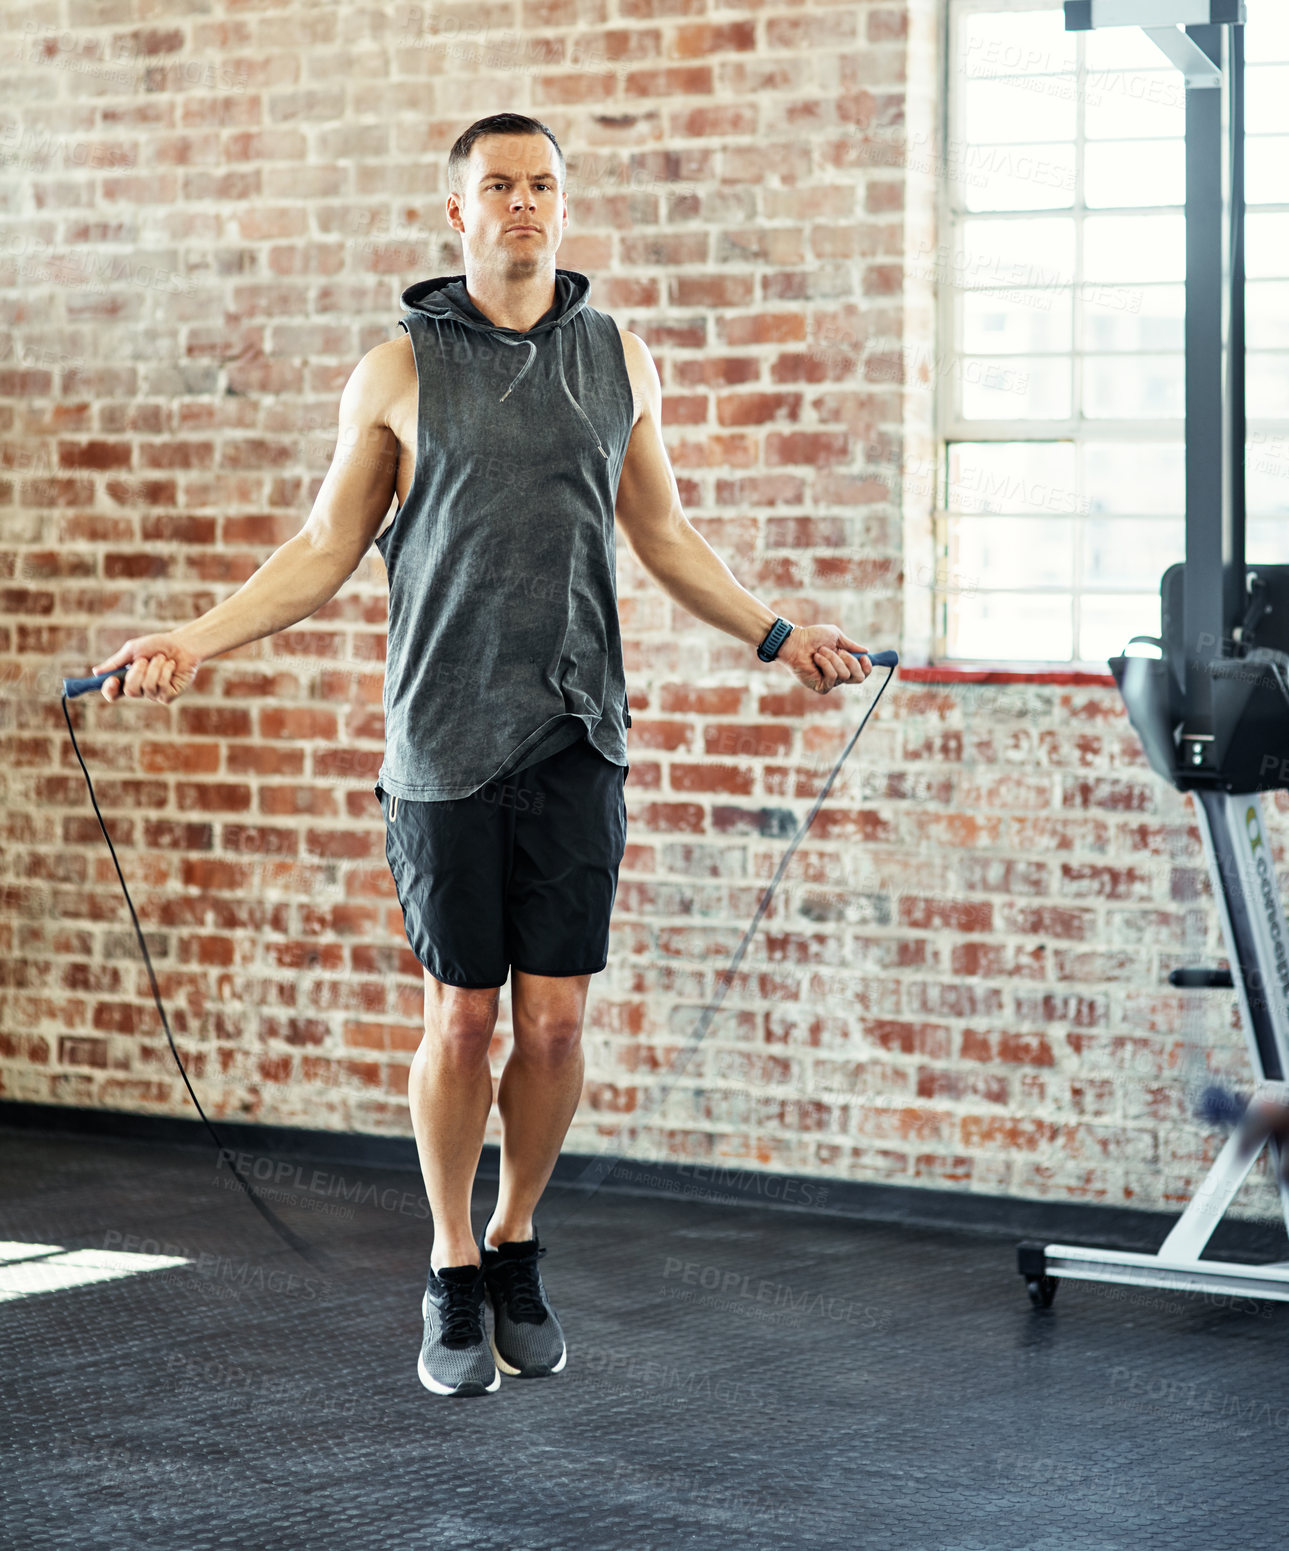 Buy stock photo Shot of a man working out in a gym